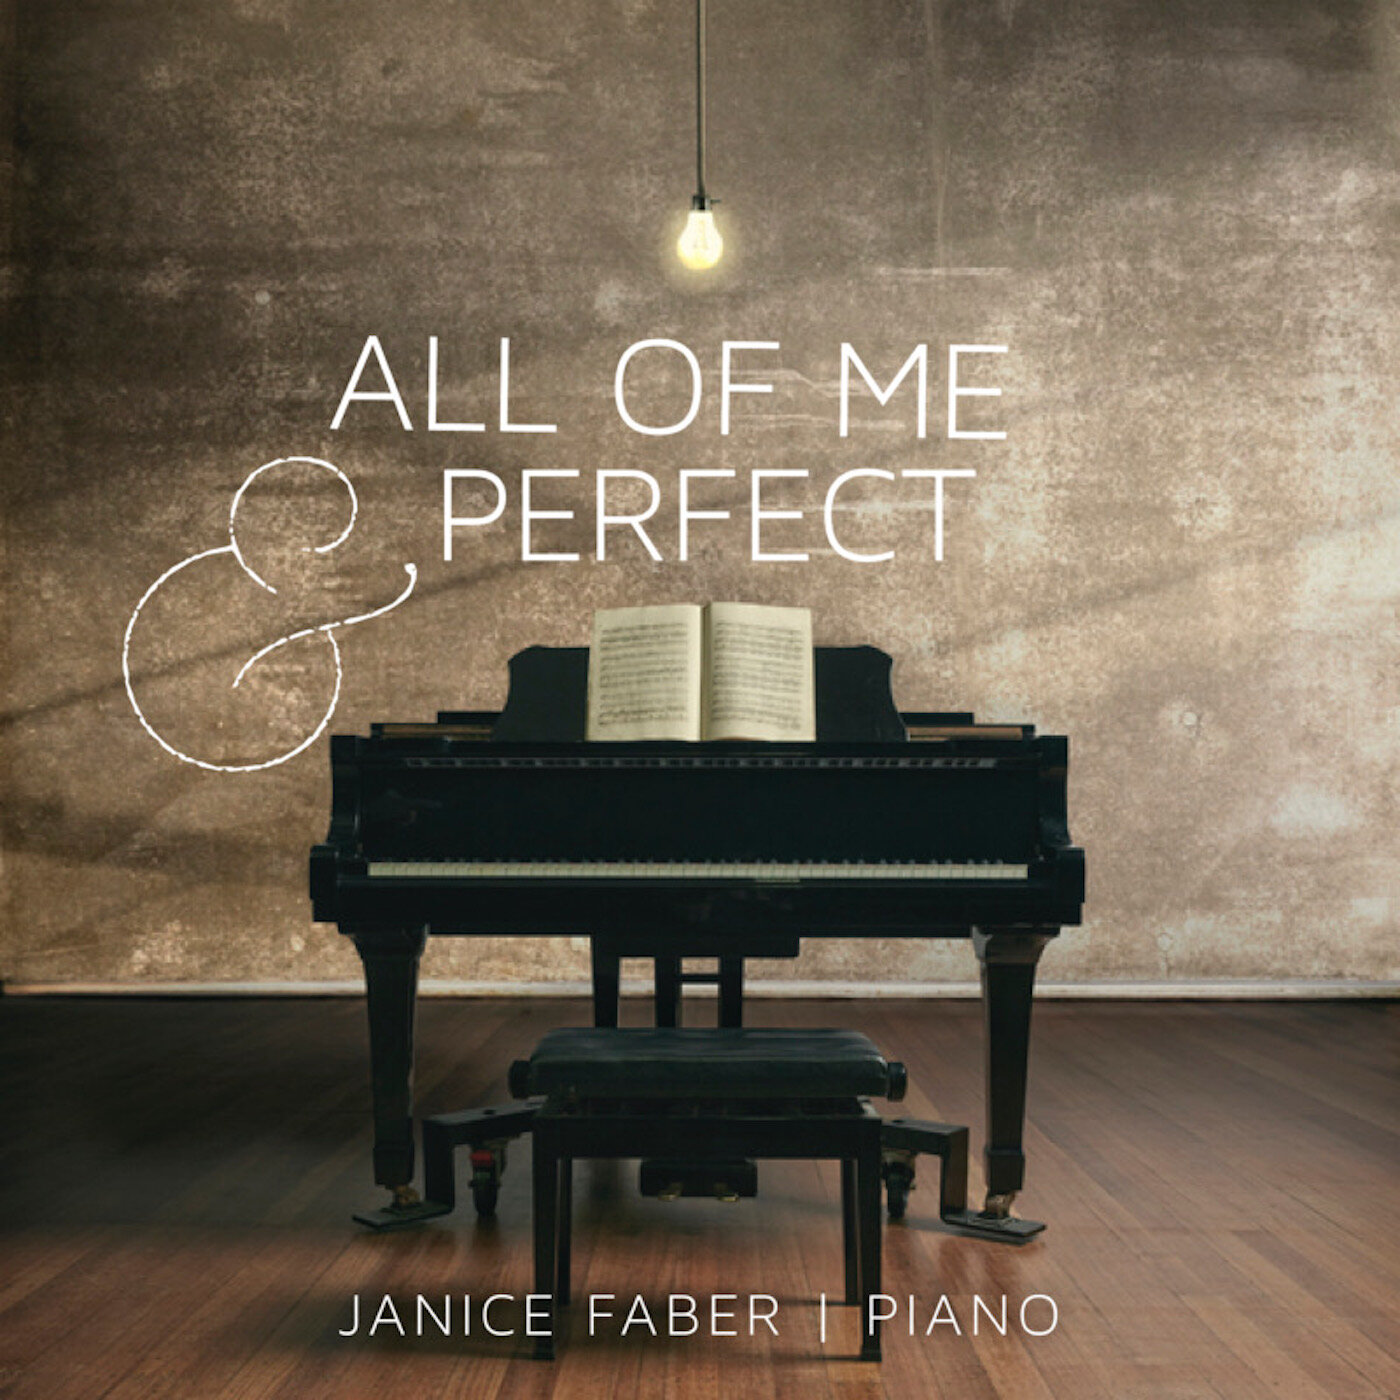 All of Me : Perfect Cover.JPG